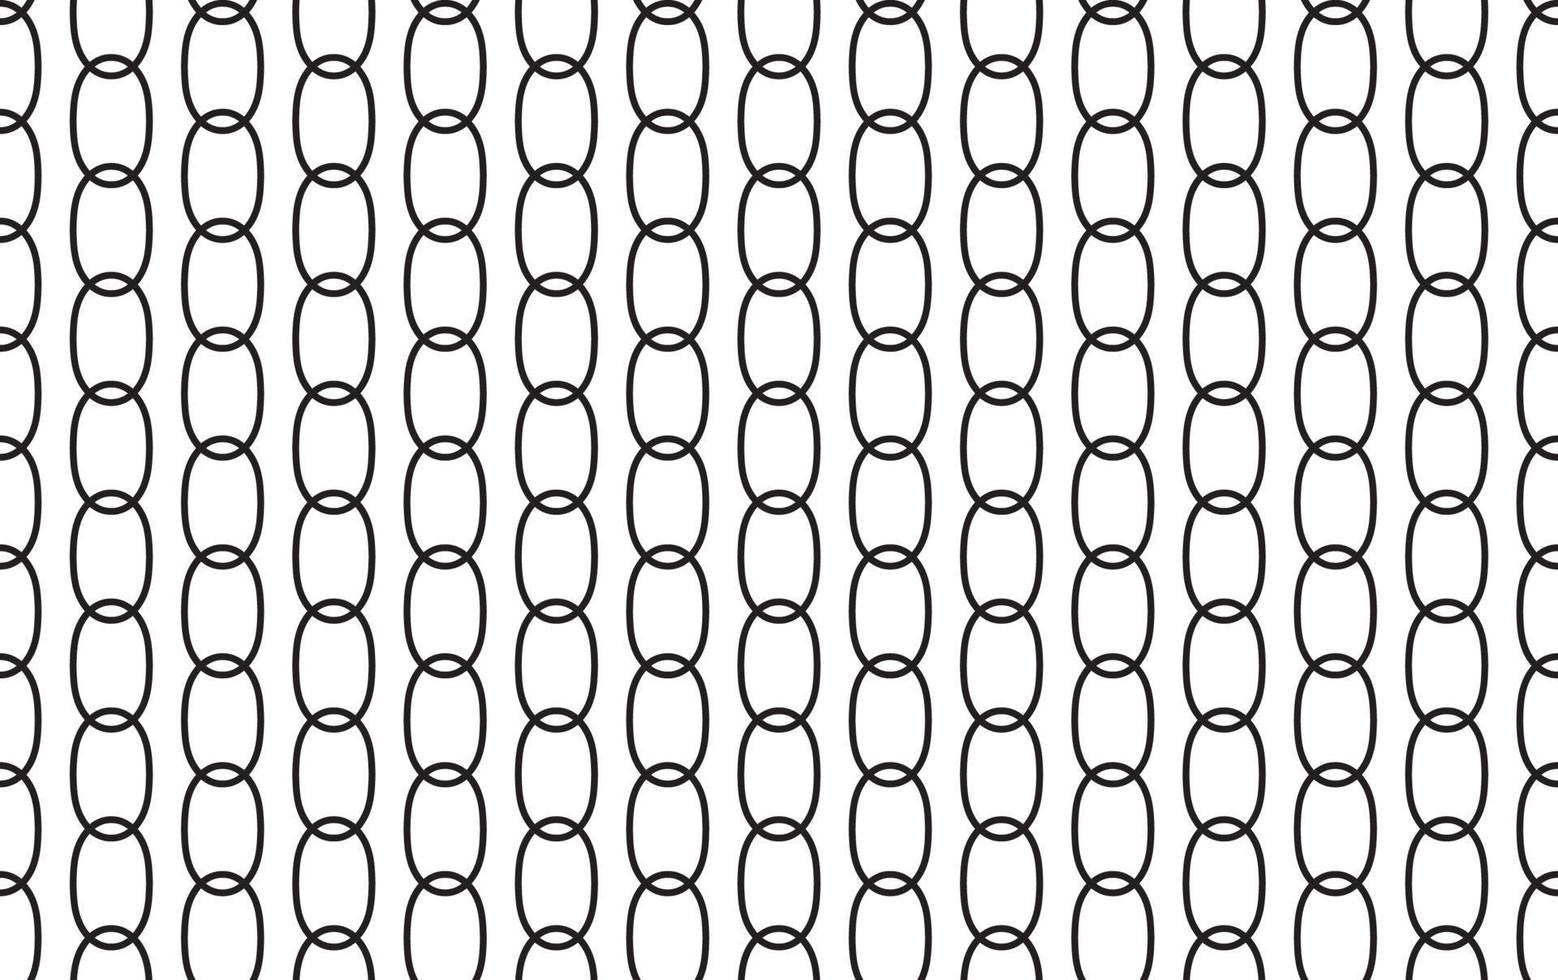 Seamless pattern with black and white colour, modern stripes background, geometric design pattern. Vector illustration.